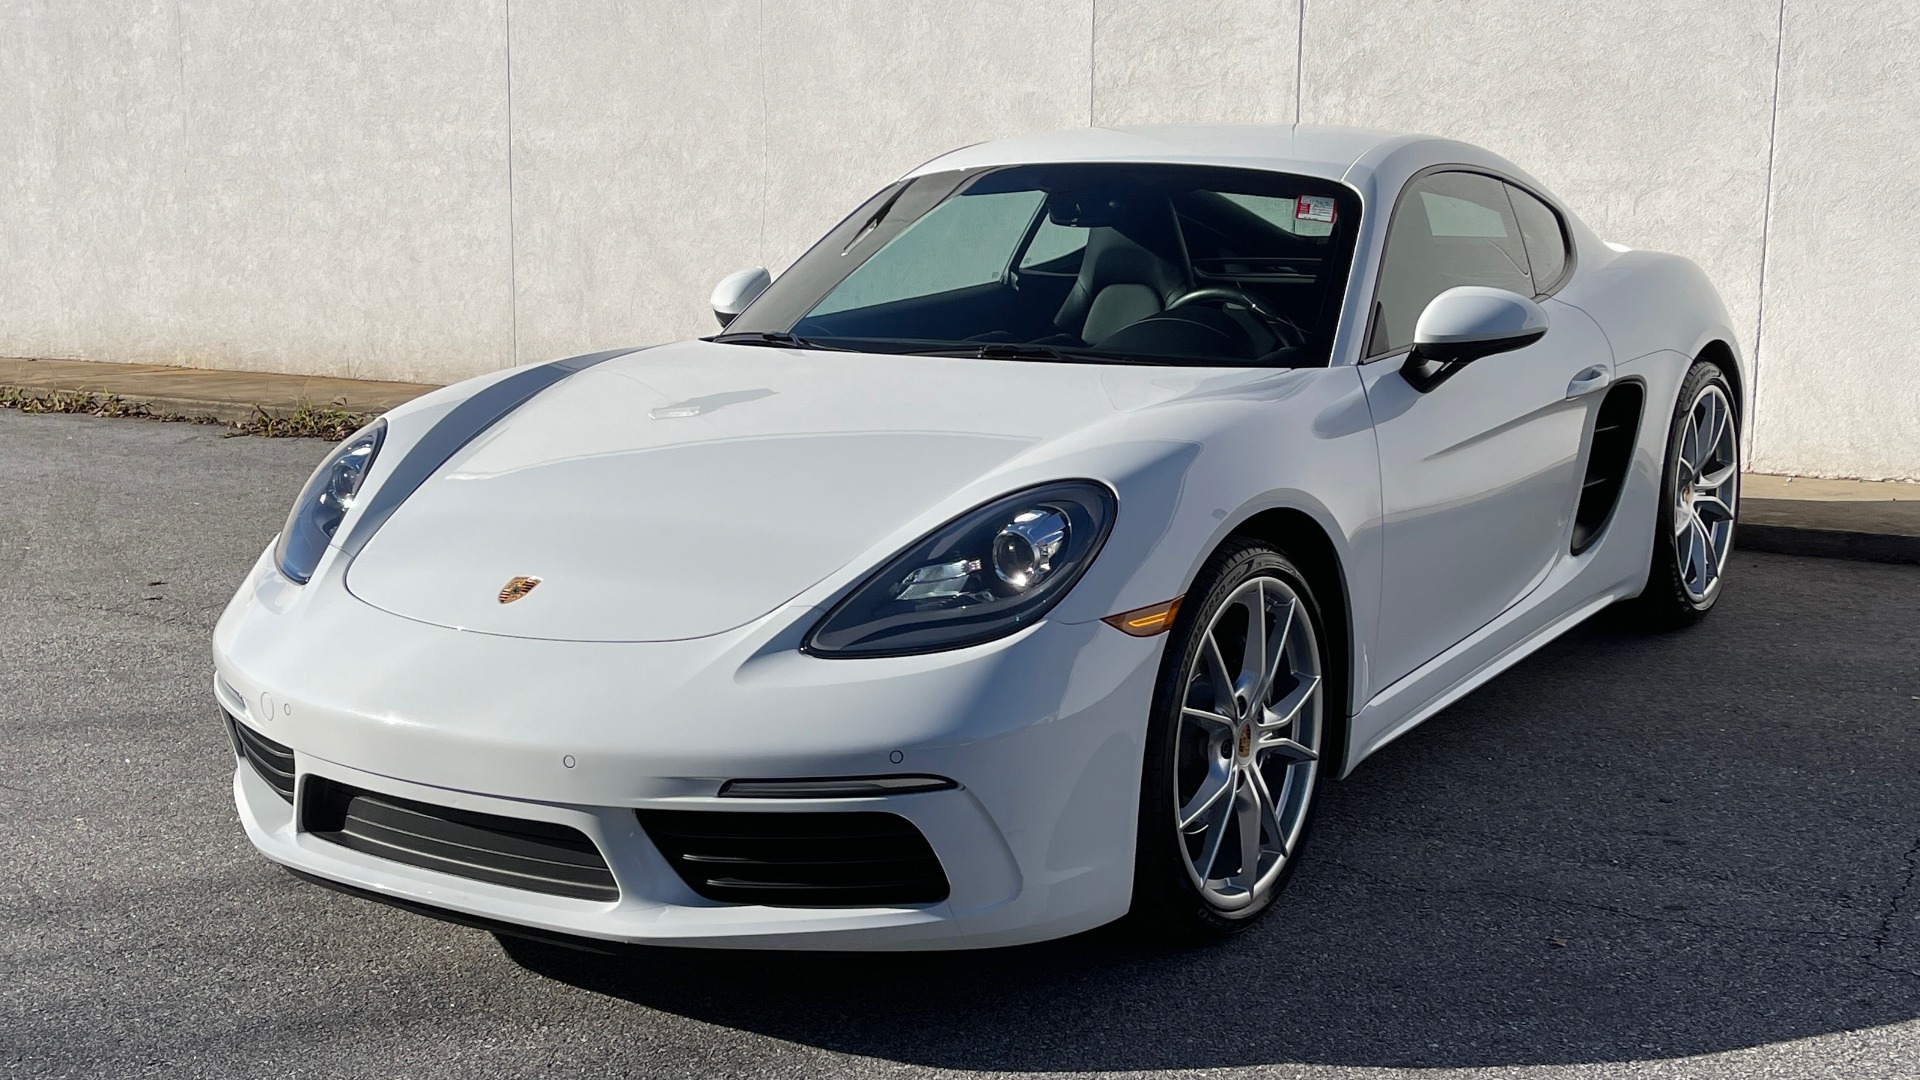 Used 2017 Porsche 718 CAYMAN COUPE / 2.0L TURBO / 6-SPD MANUAL / BOSE / 20-INCH WHEELS for sale $49,395 at Formula Imports in Charlotte NC 28227 6